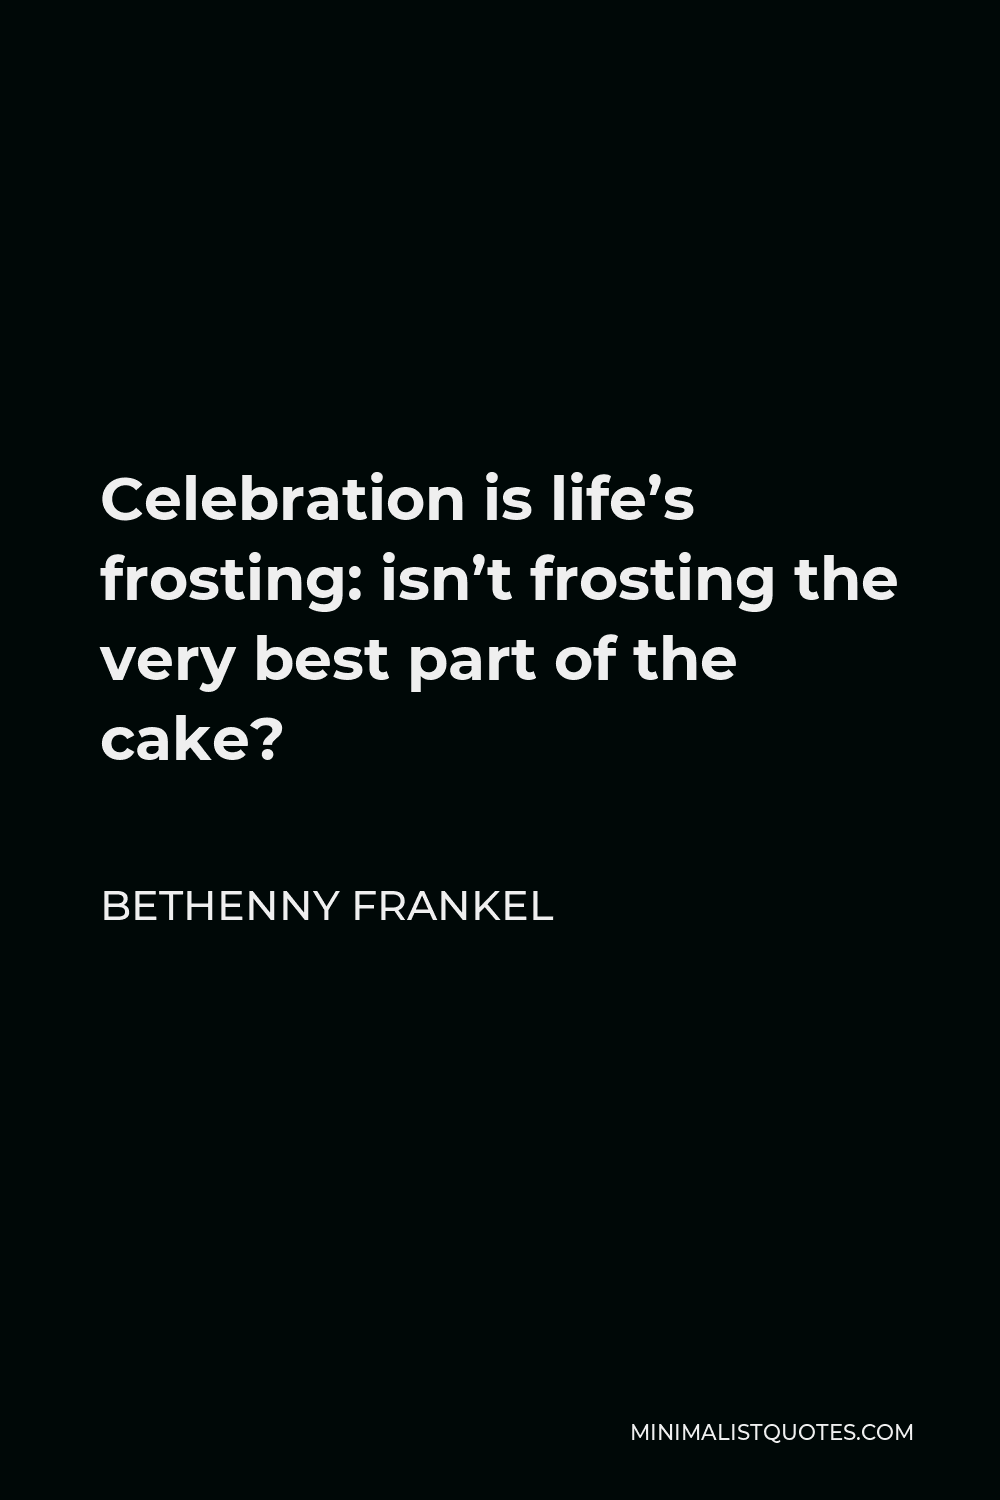 Bethenny Frankel Quote - Celebration is life’s frosting: isn’t frosting the very best part of the cake?